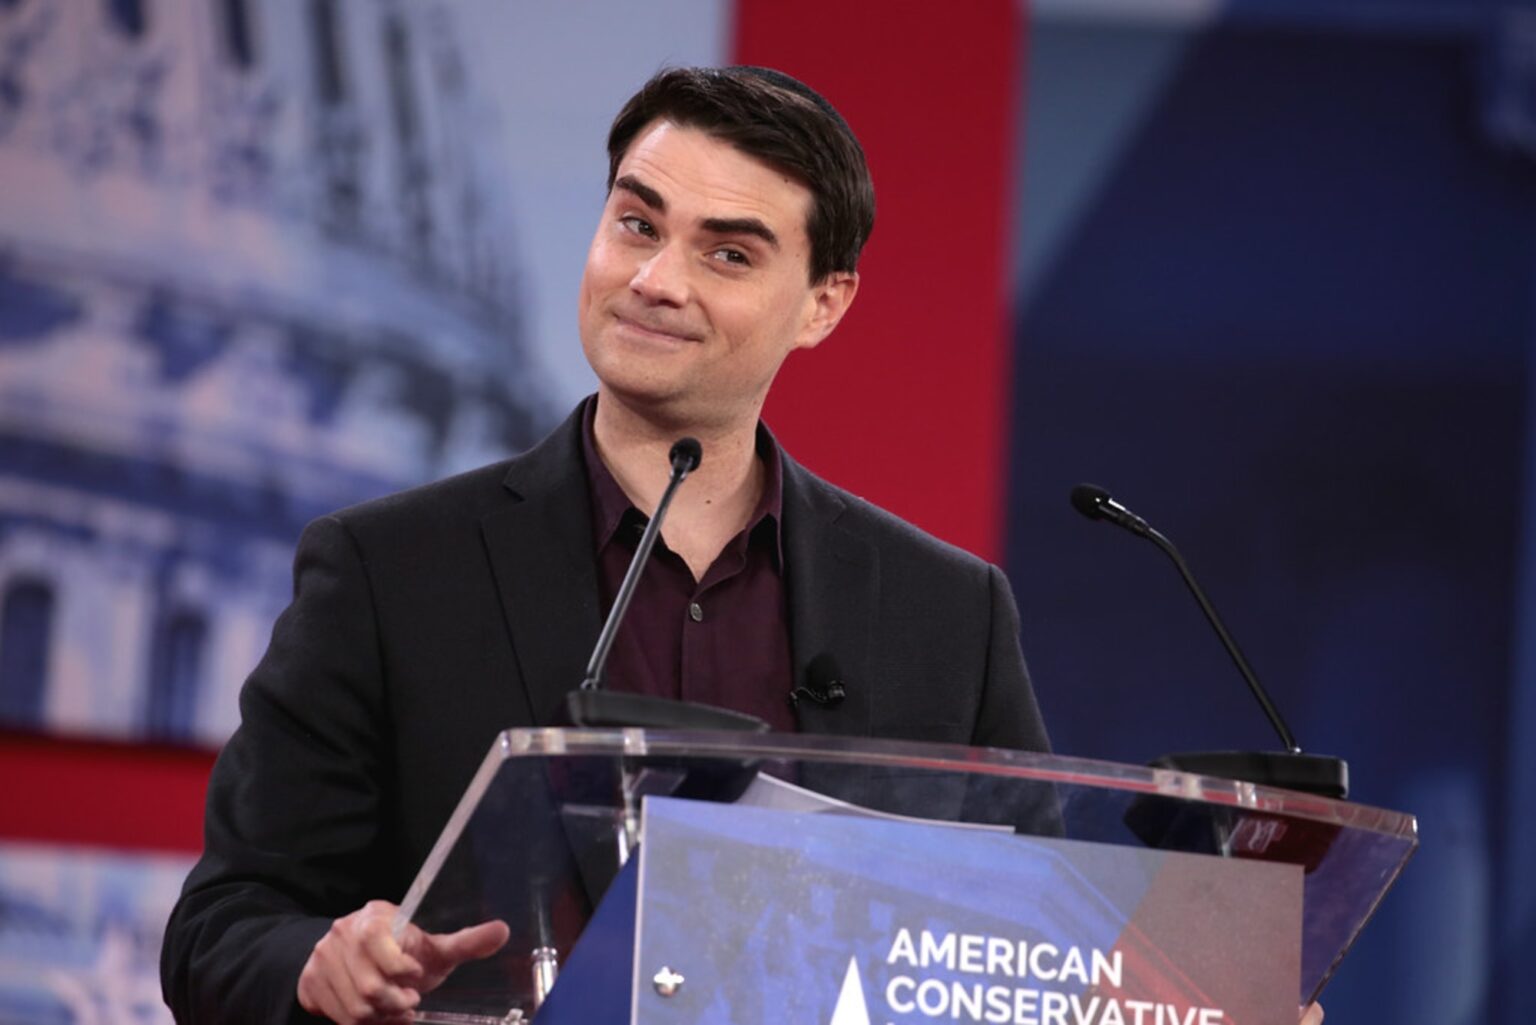 Whether you love or hate him, you have to admit the political commentator is quite iconic. Laugh along at all the best Ben Shapiro memes here.